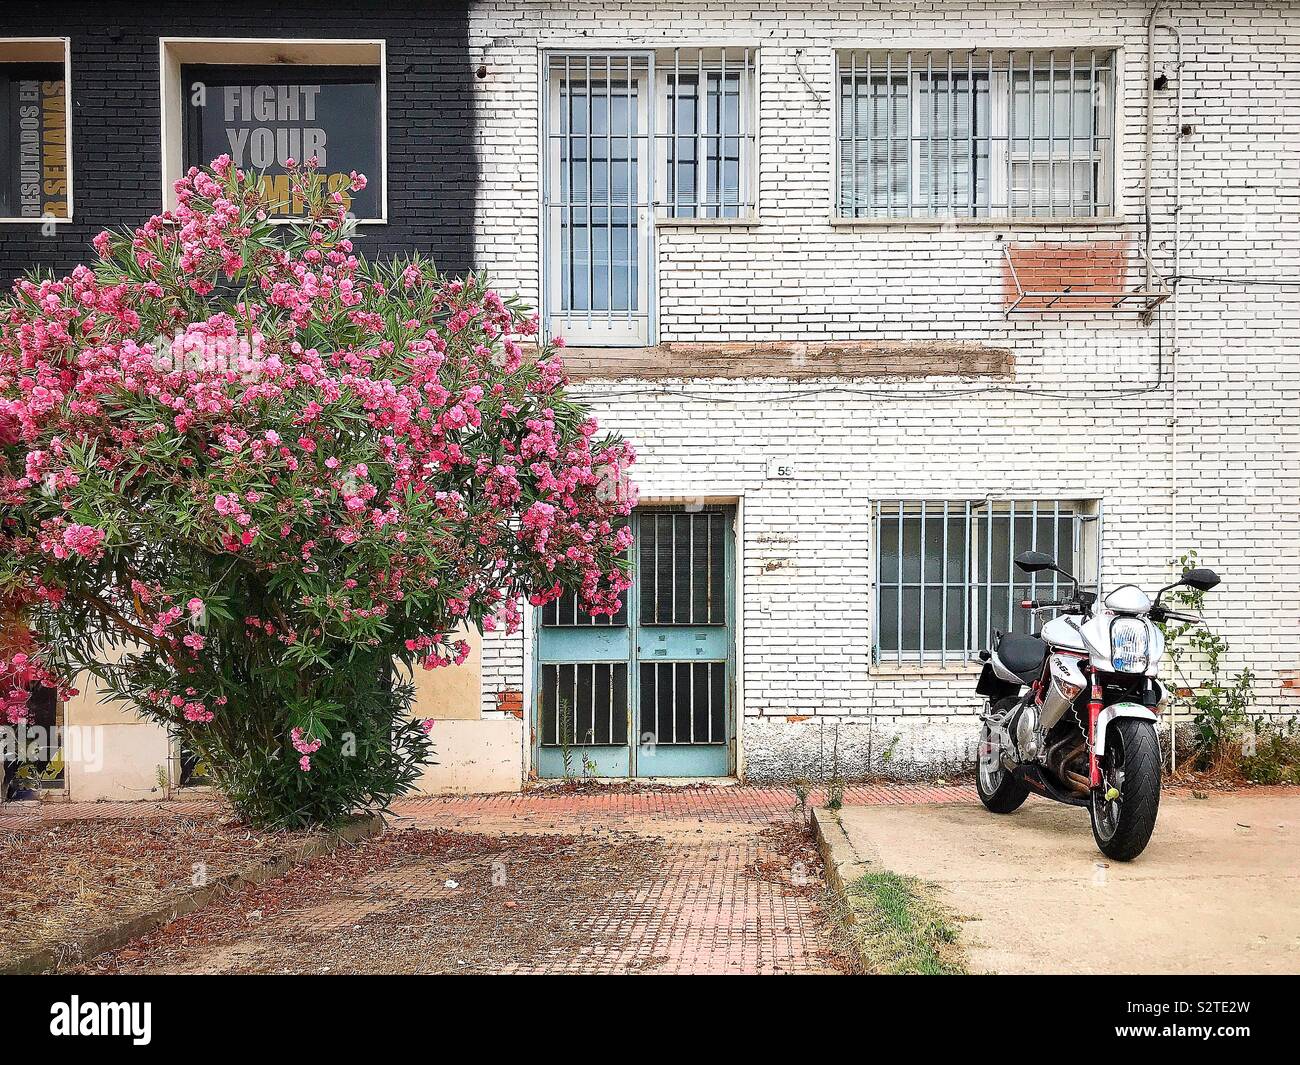 A motorcycle is parked in front of a somewhat dilapidated building with white painted brickwork and doors and windows secured by metal bars, painted light blue. A shrub is in full bloom Stock Photo